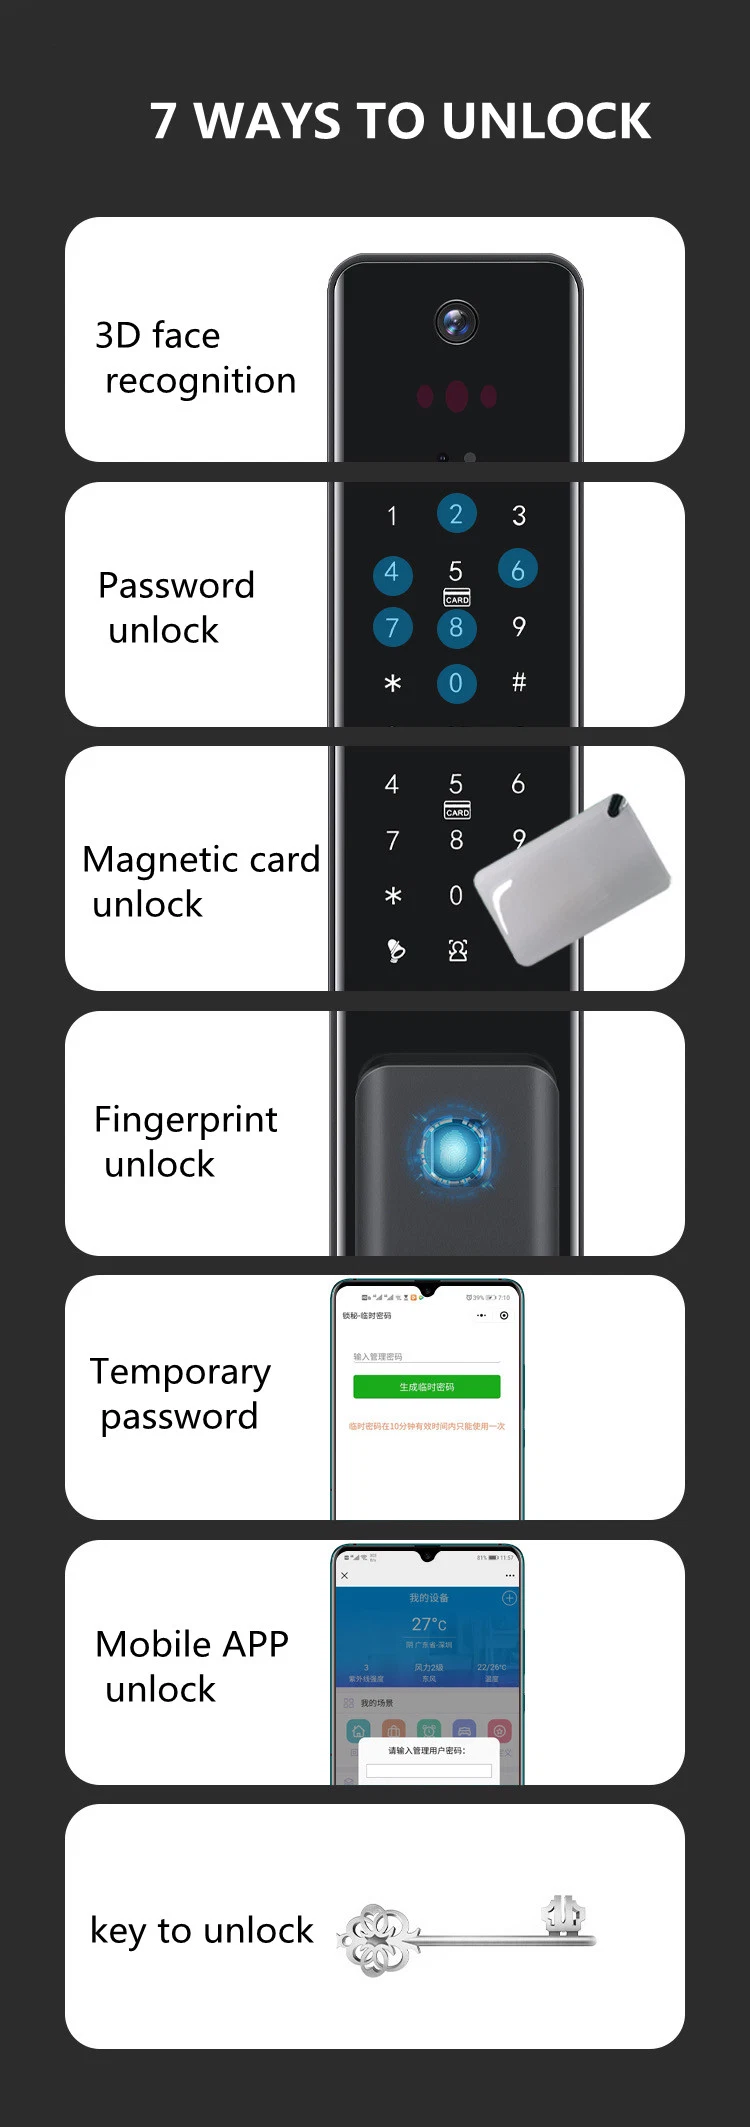 Fingerprint Smart Mobile APP Alarm Anti-Theft Commercial Double Sided Push Pull Door Locks with Recognition Facial Scanner